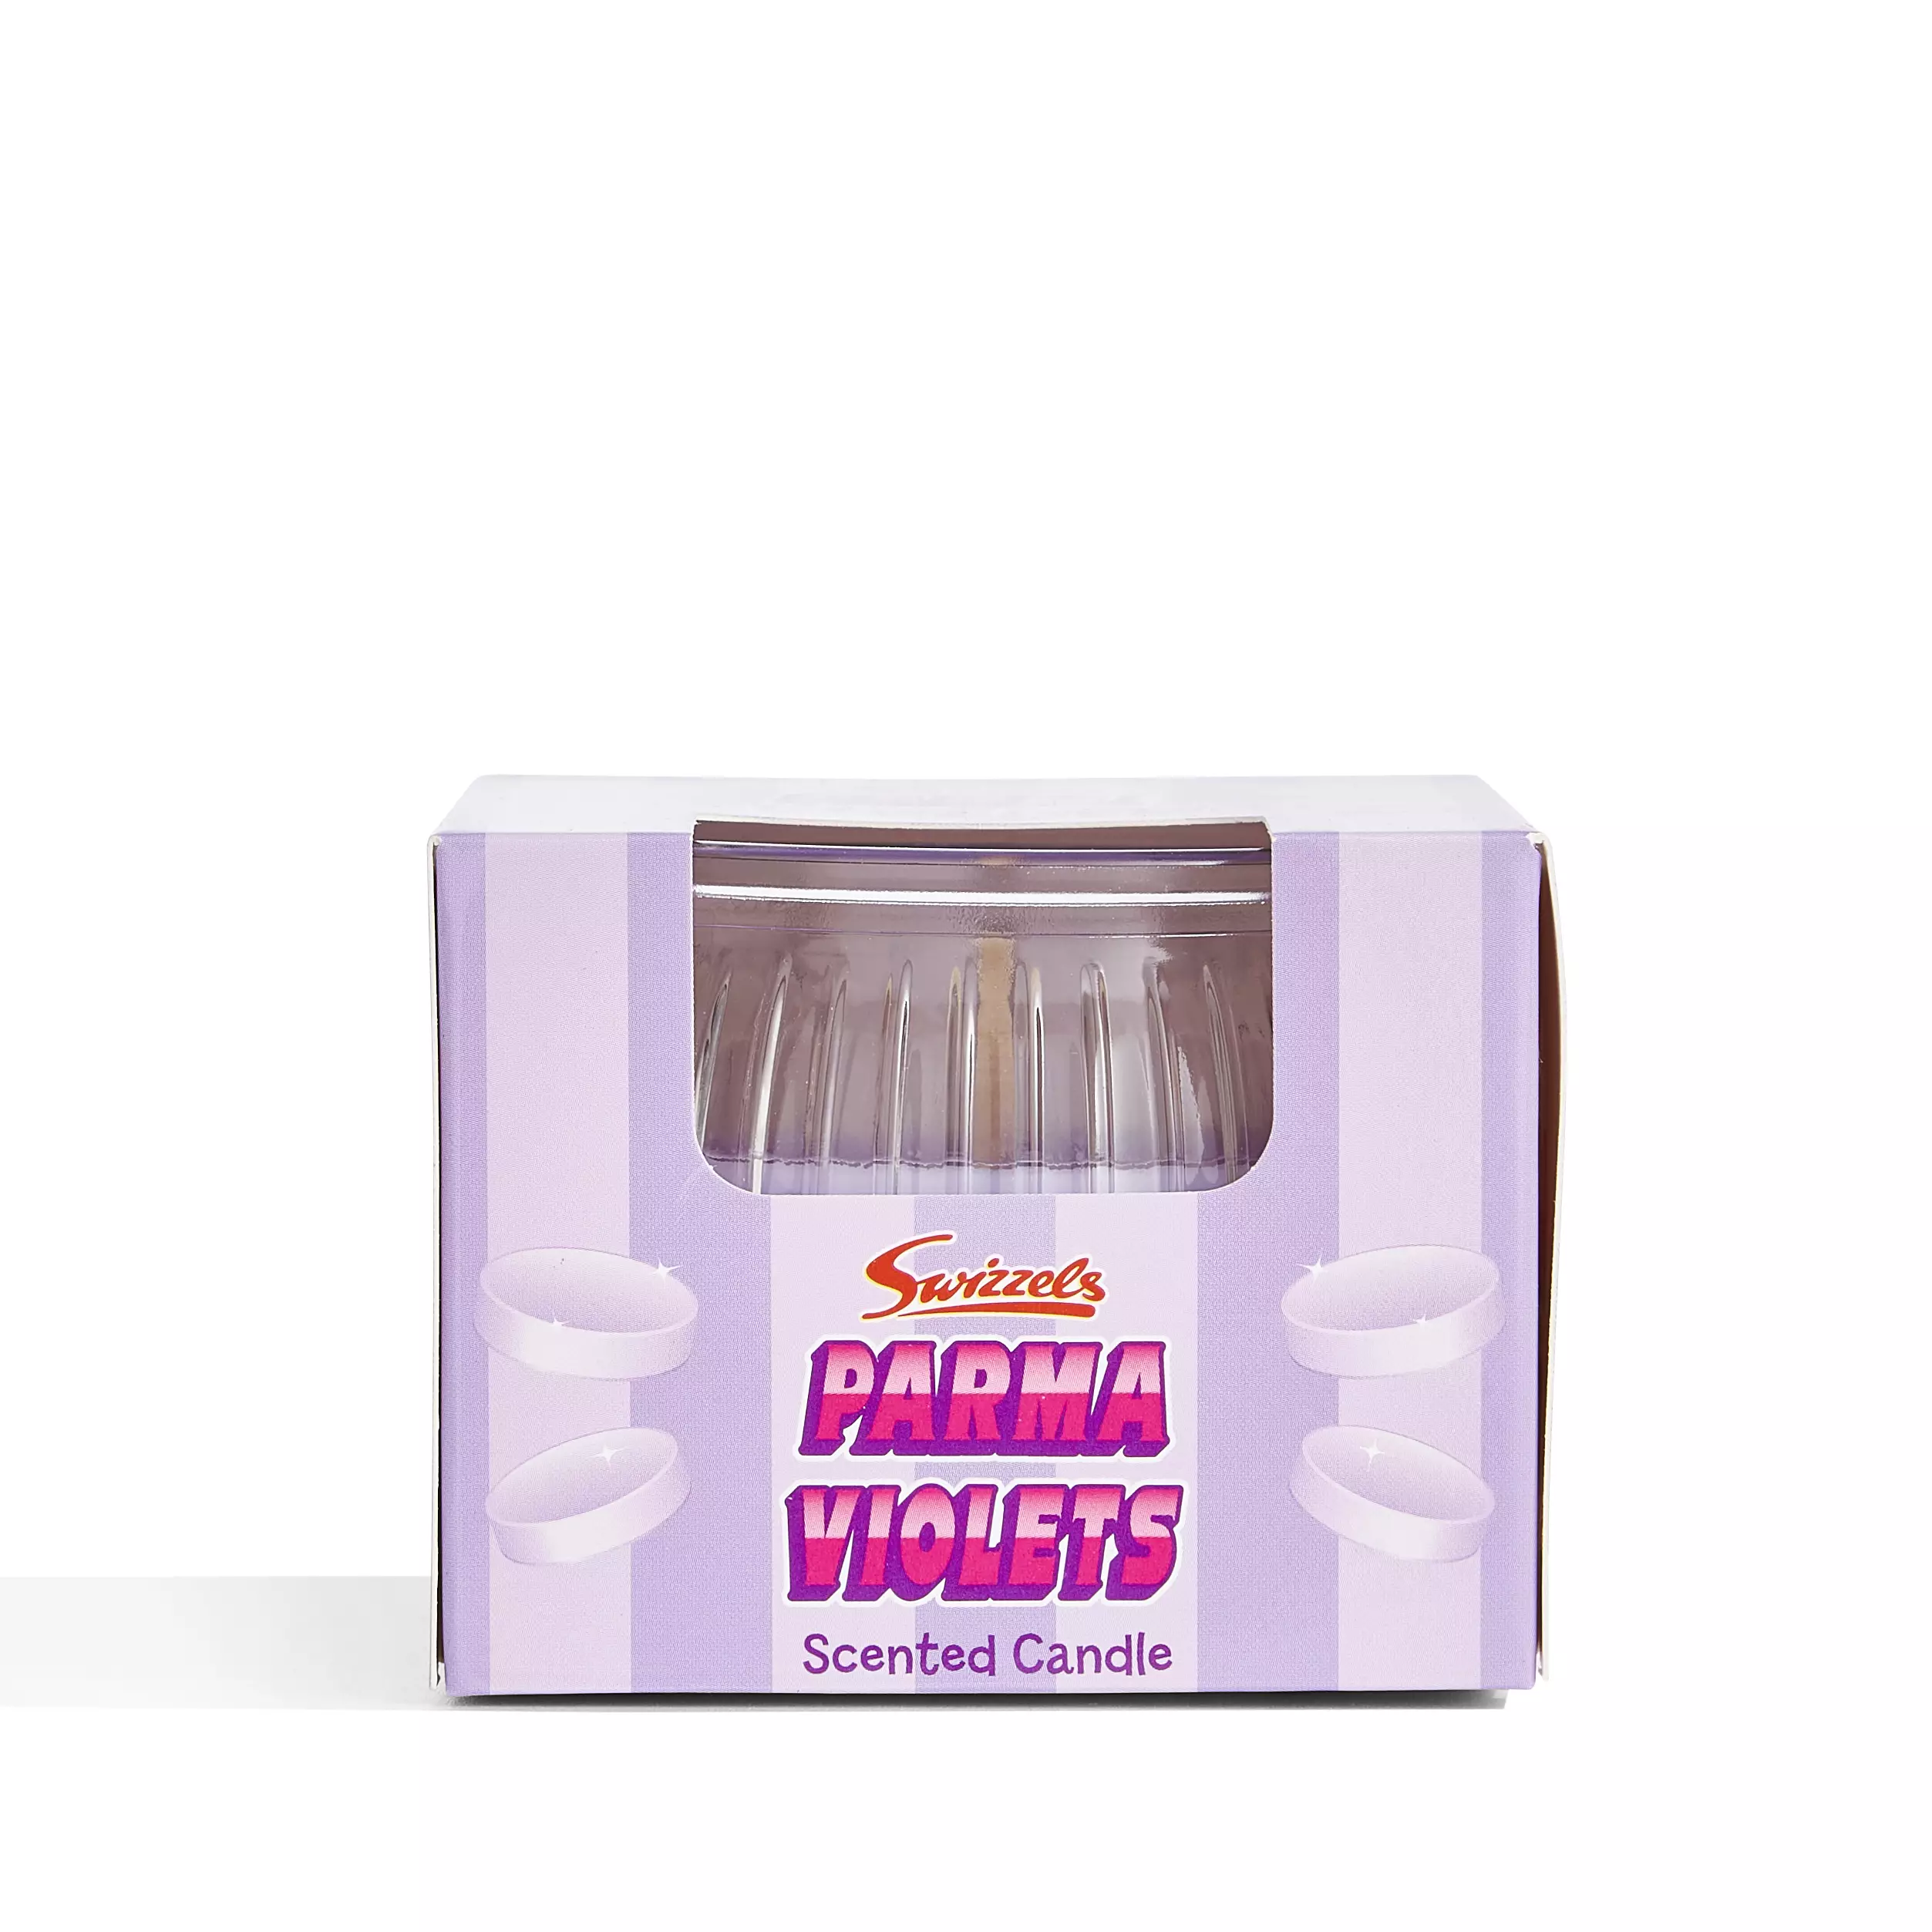 It's National Parma Violets Day next month and you can light one of these to celebrate (